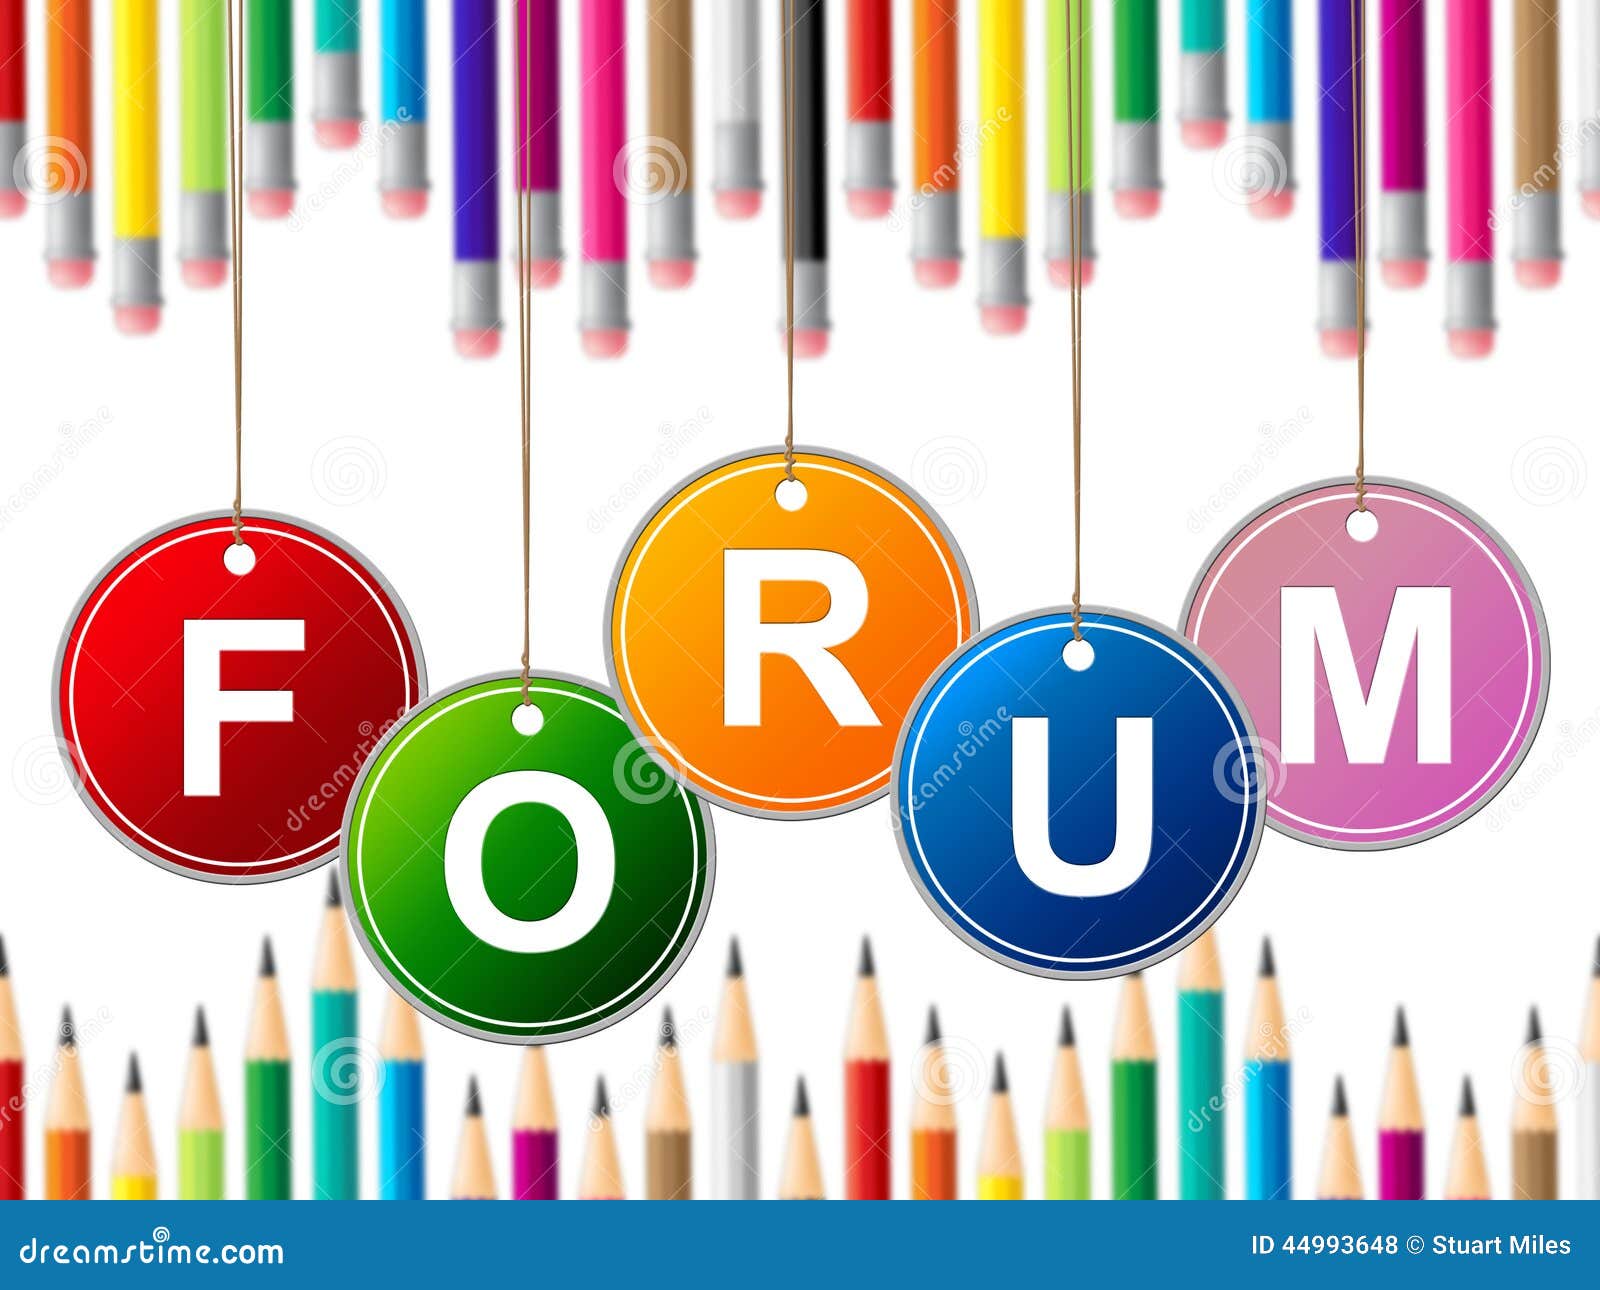 forums forum represents social media and chat